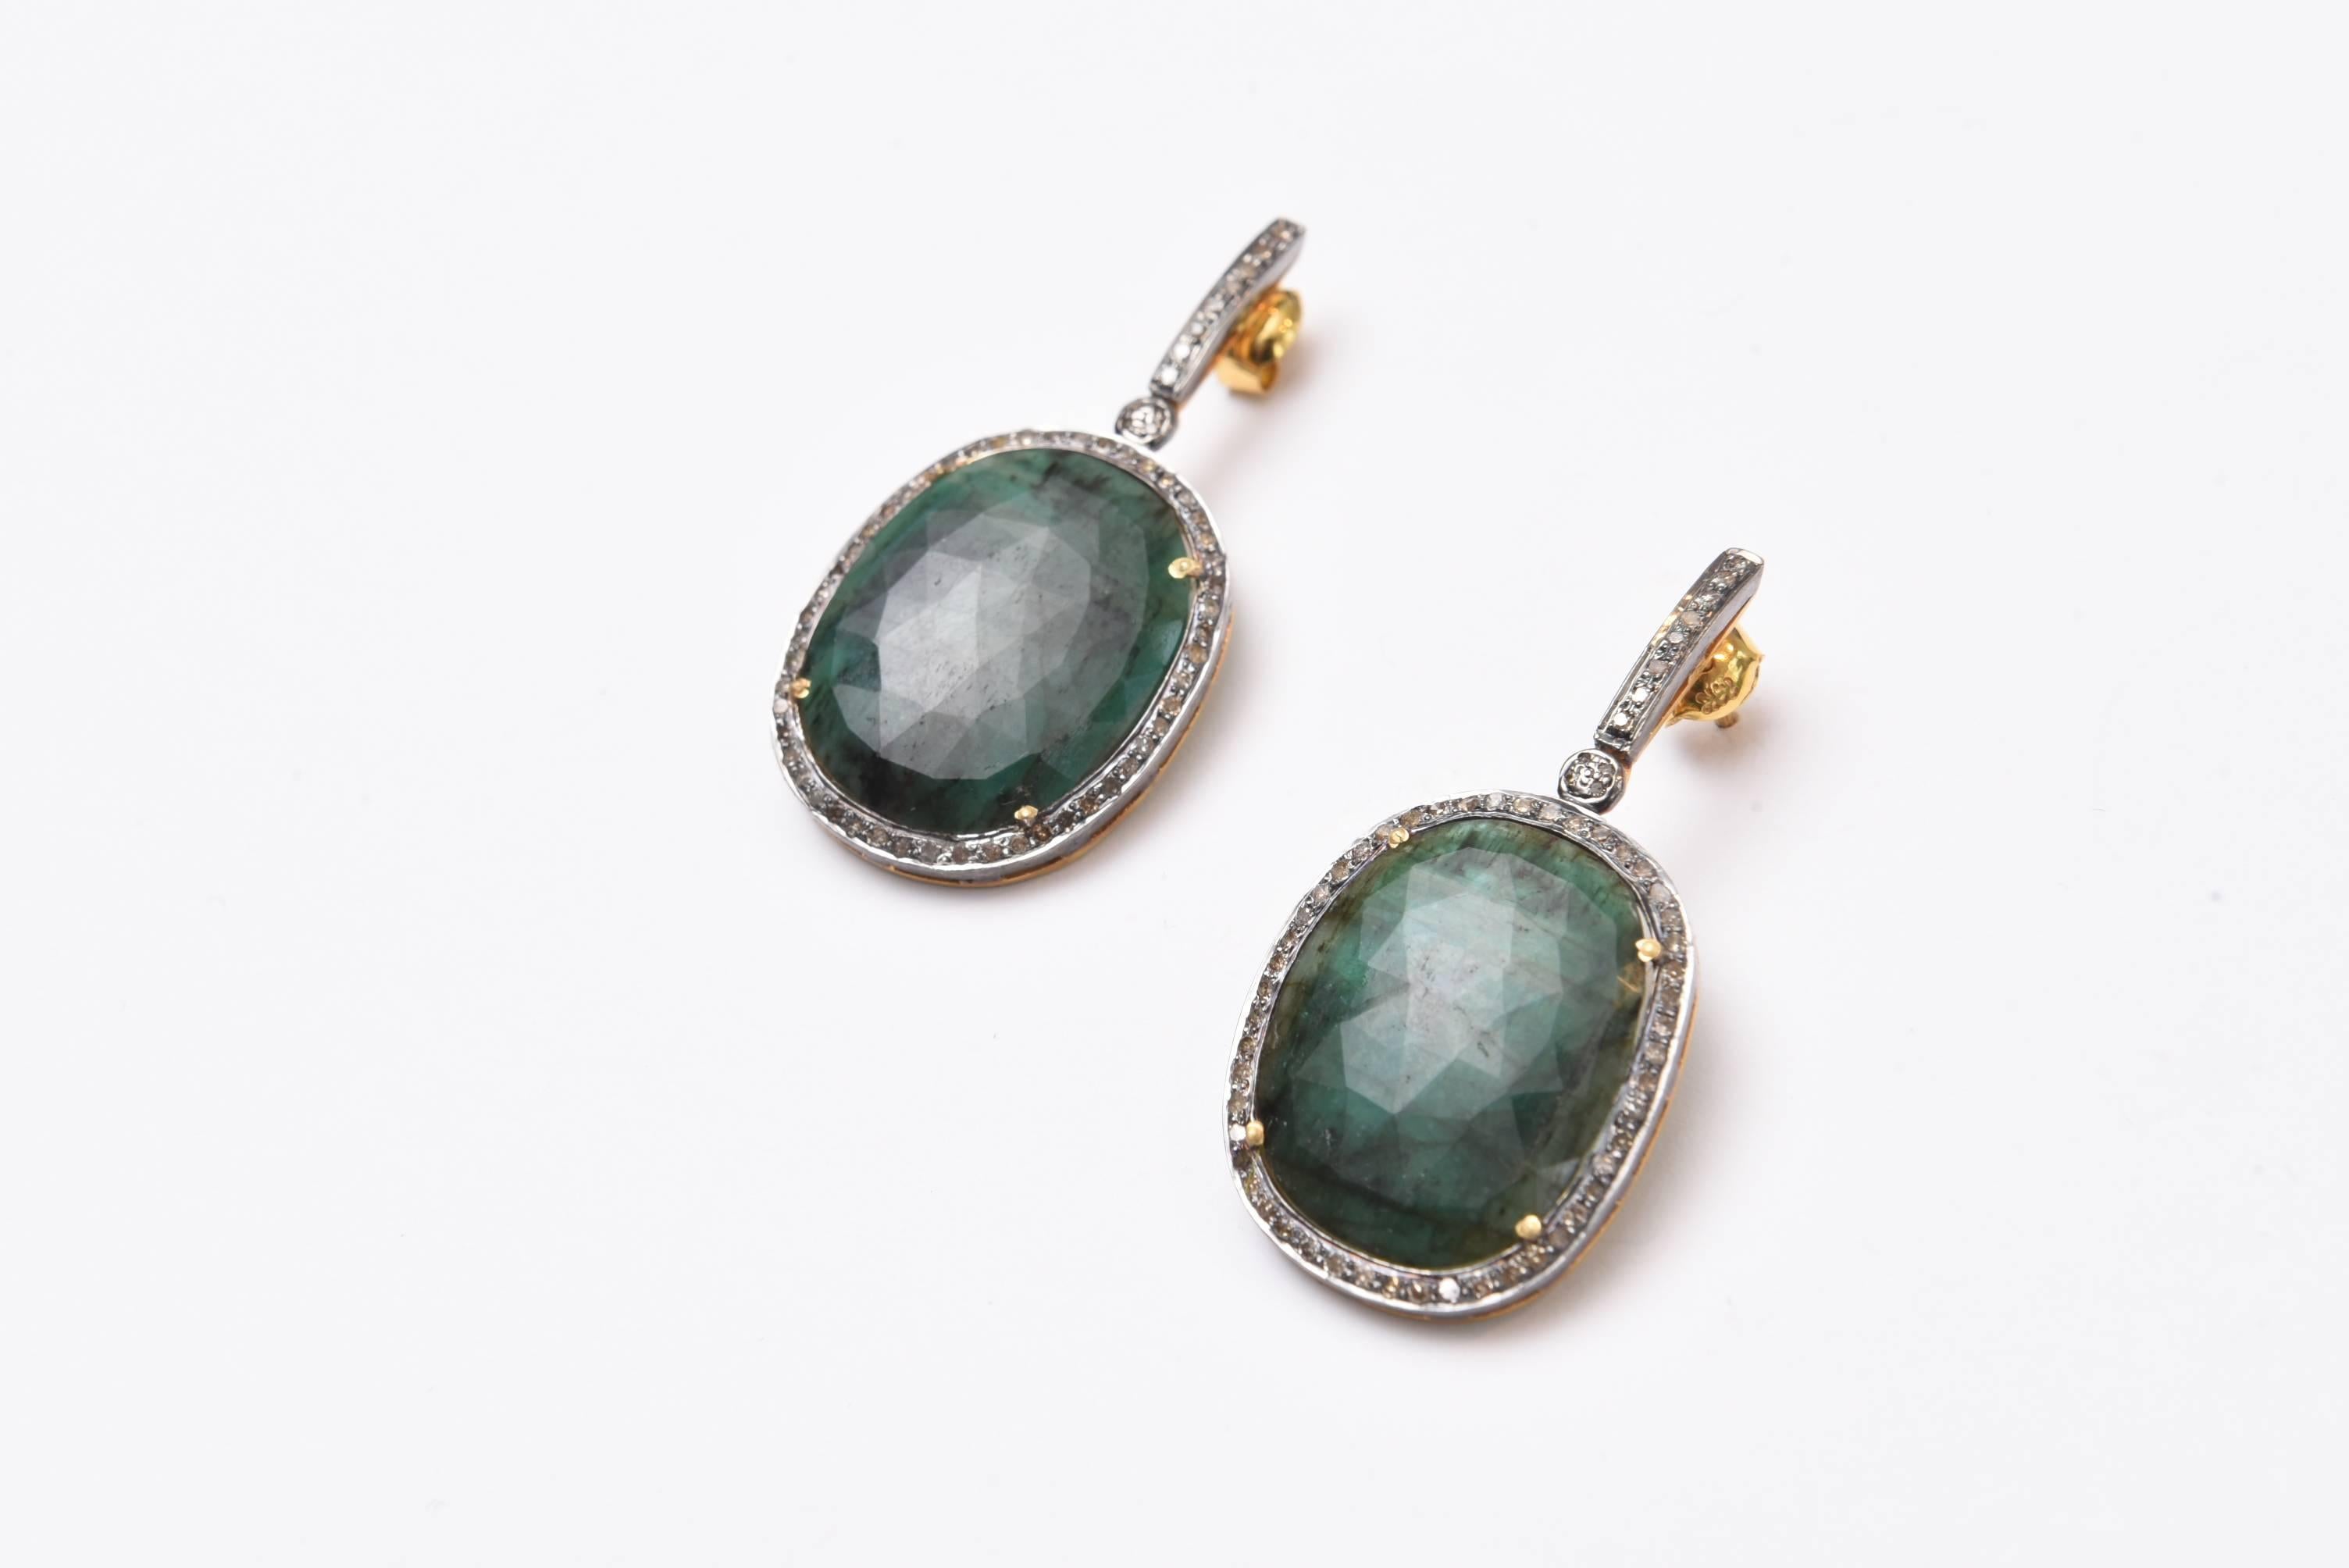 Rosecut emerald slices bordered in pave`-set diamonds set in an oxidized sterling silver with diamonds on the elongated post.  Carat weight of emeralds is 50.75.  These are emeralds in their natural state and polished.  Diamond weight is 1.10